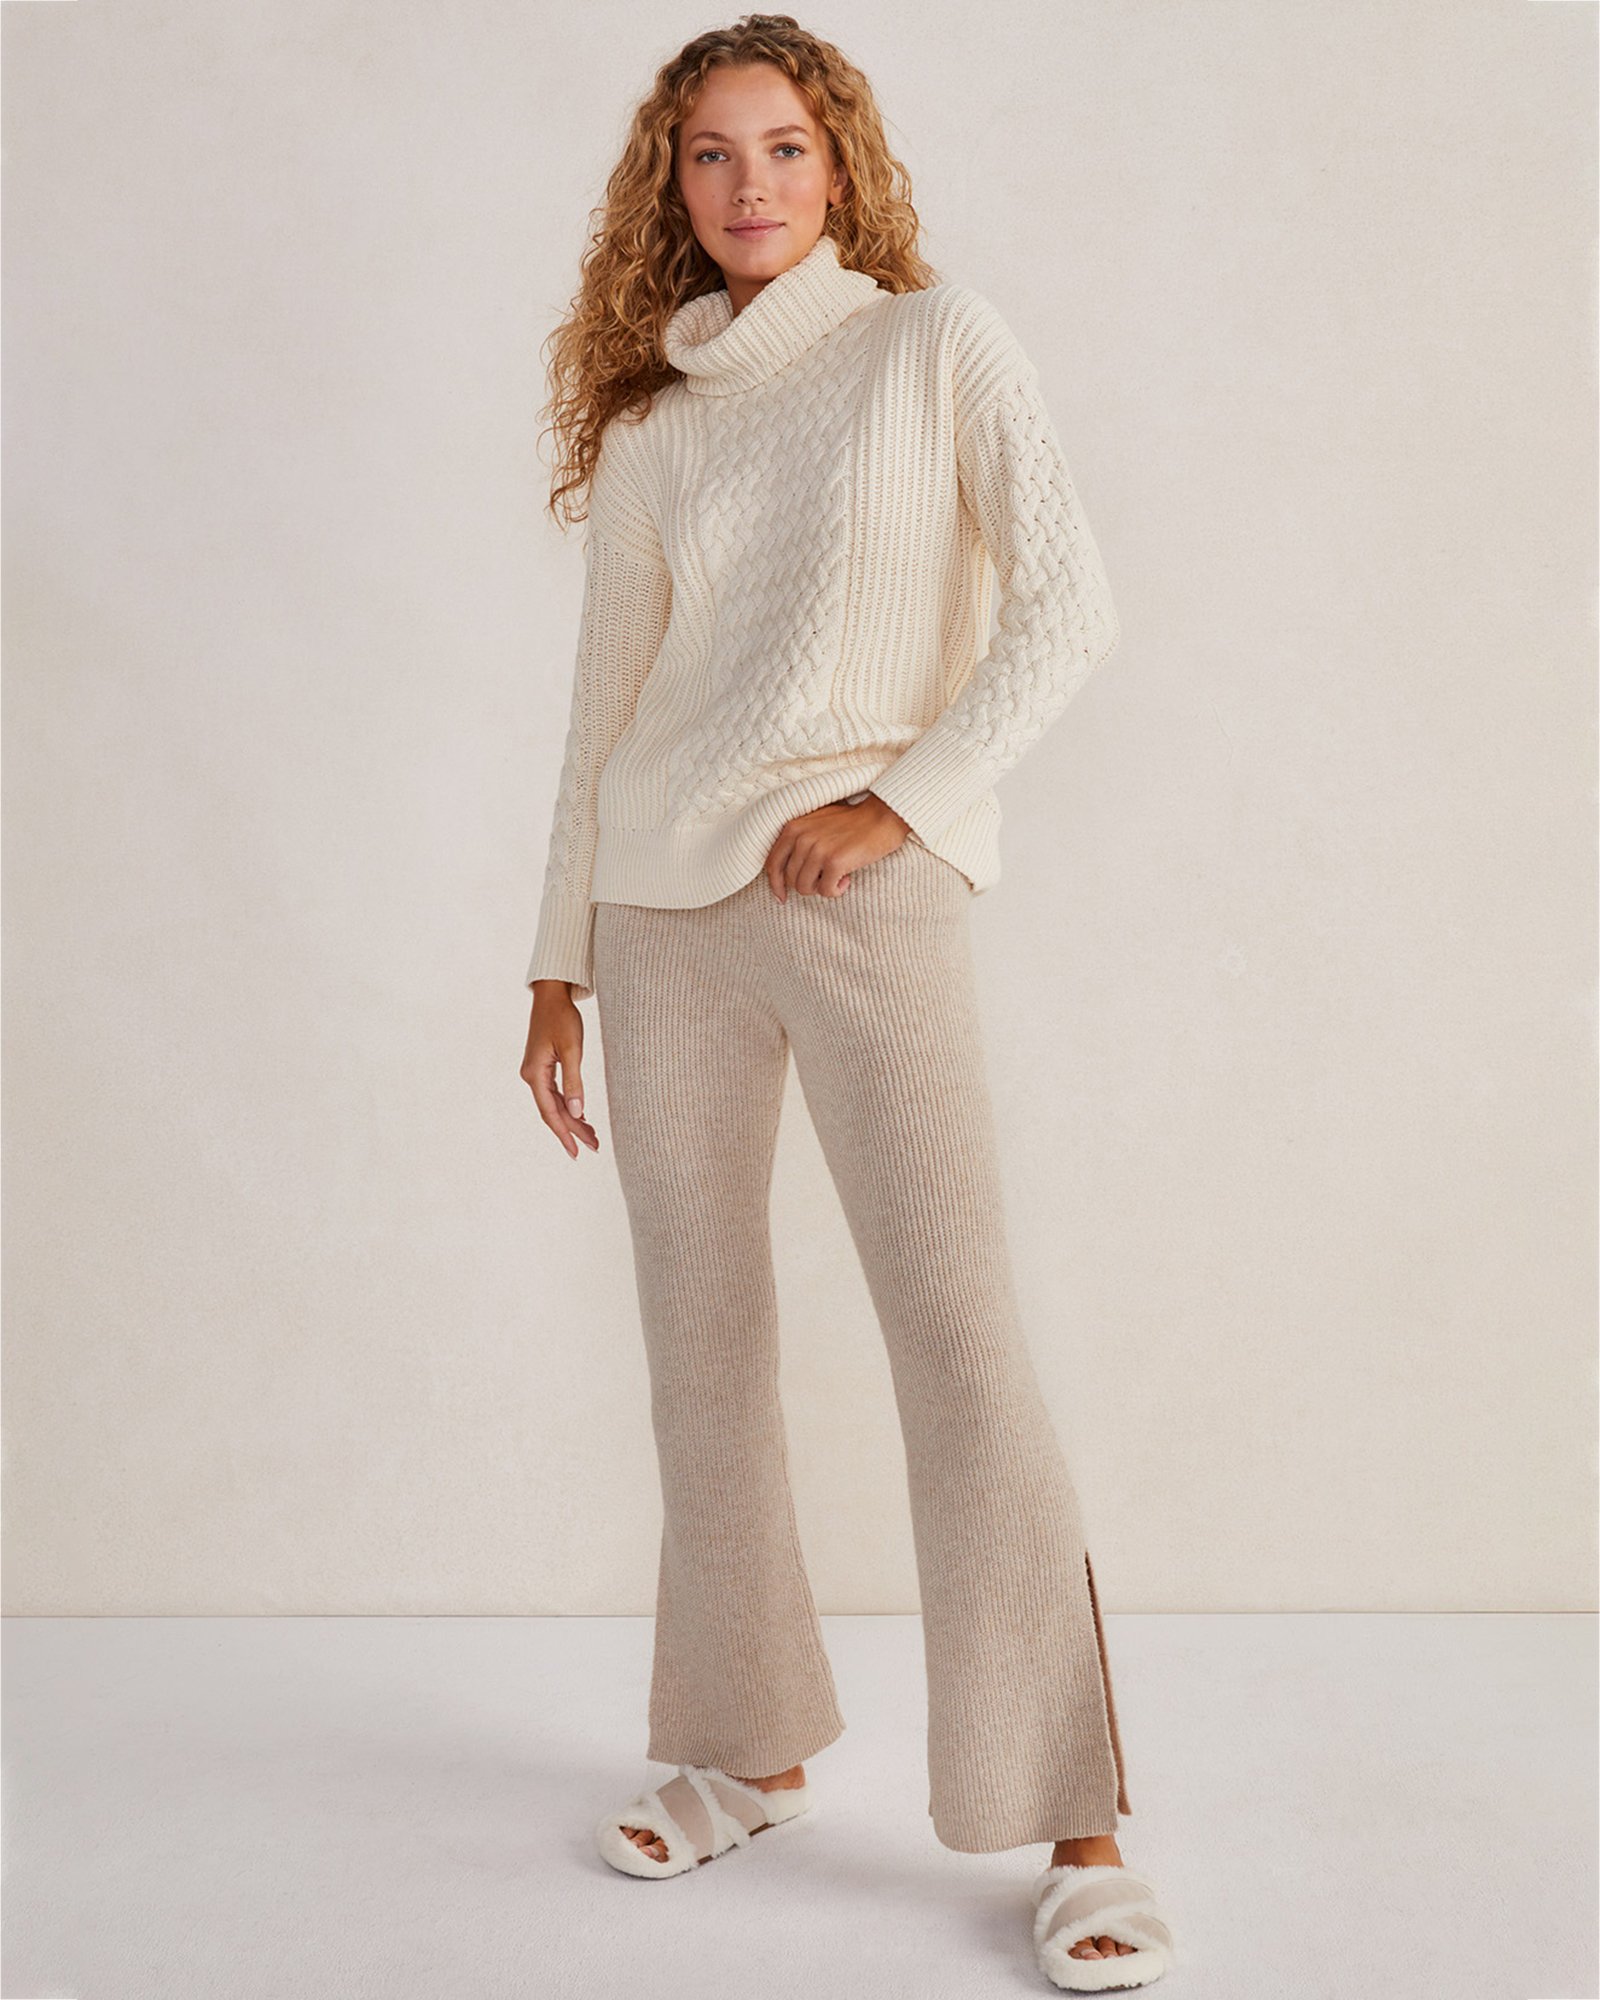 Talbots Braided Cable Knit Sweater - Bone - Xxl  In Neutral